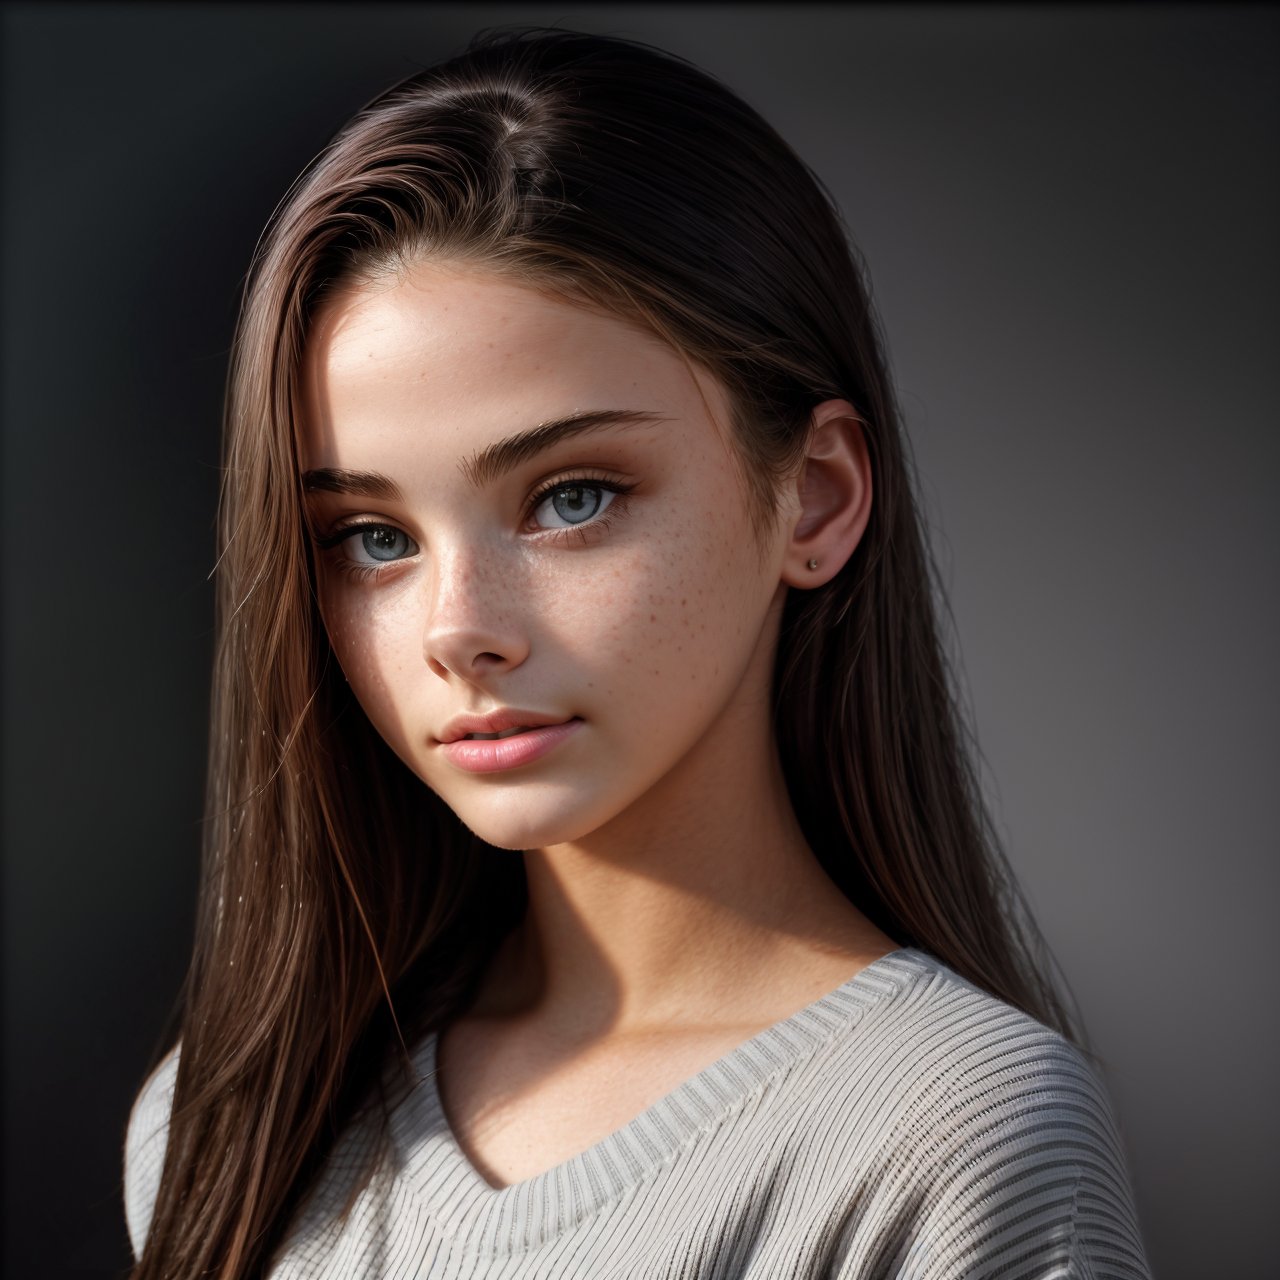 (masterpiece:1.3), best quality profile of stunning (AIDA_LoRA_MeW2016:1.03) <lora:AIDA_LoRA_MeW2016:0.9> in (simple light gray sweater:1.1), [little girl], glossy skin with visible pores and freckles, pretty face, naughty, funny, happy, playful, intimate, flirting with camera, dramatic, composition, kkw-ph1, (colorful:1.1), (studio photo:1.1), (charcoal smoky black background:1.1)